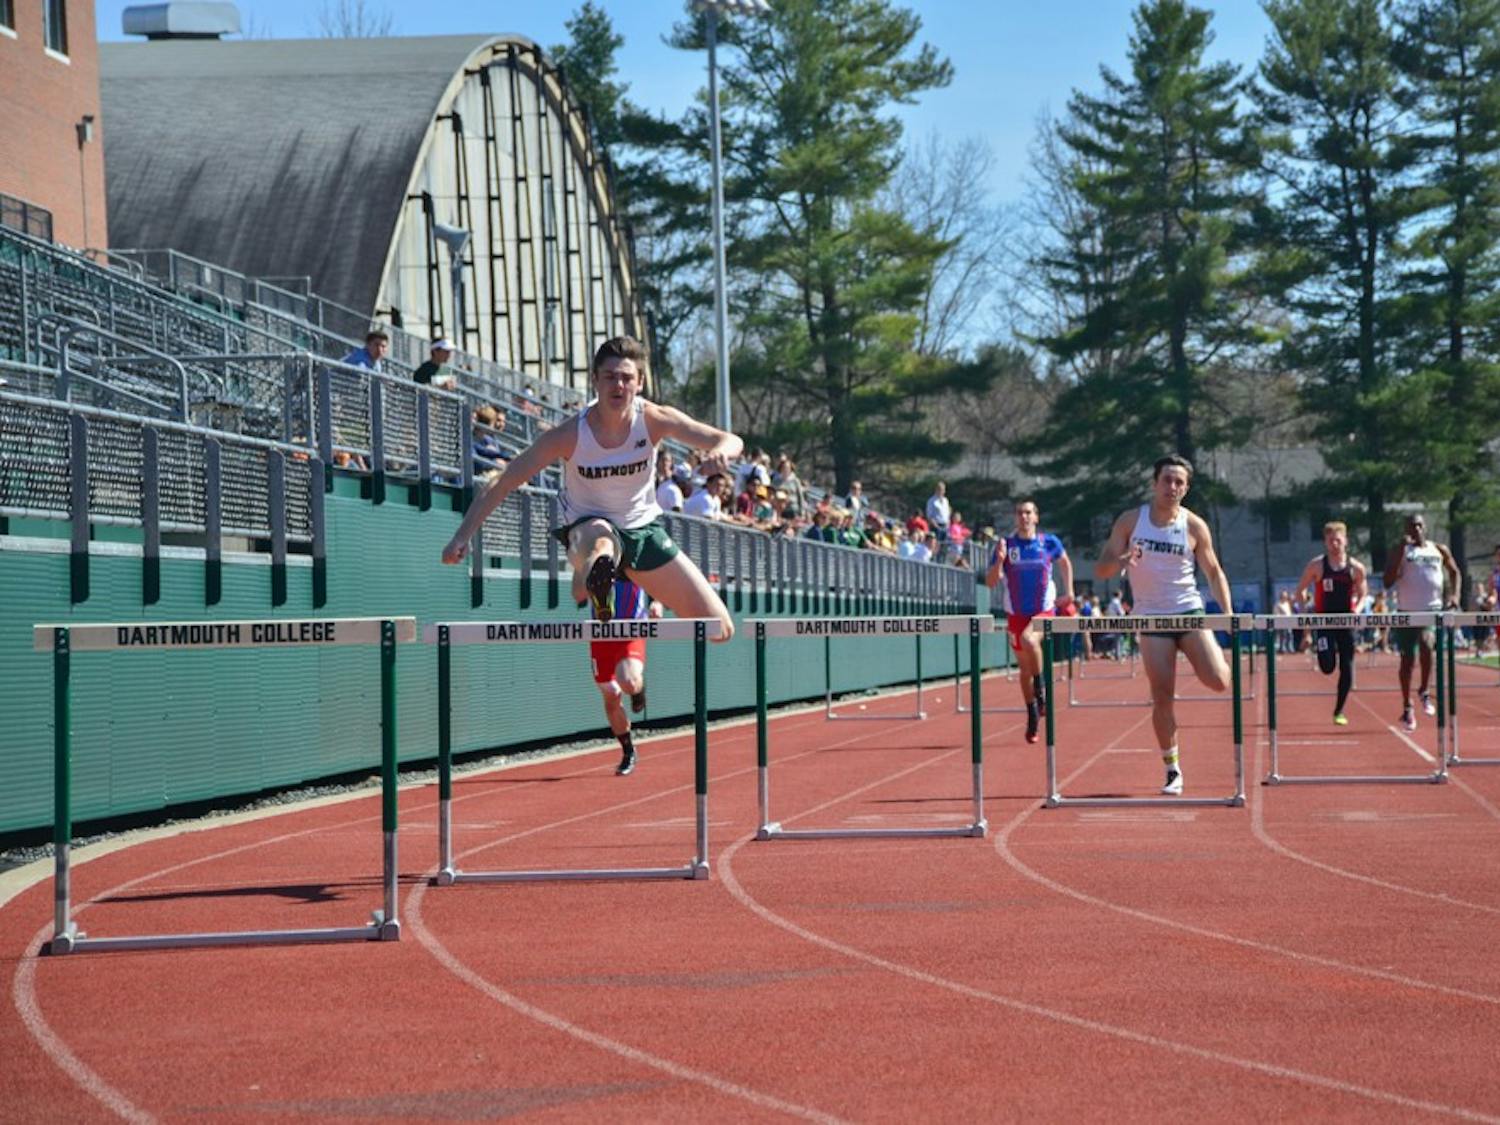 Both men's and women's track and field took first place this weekend.